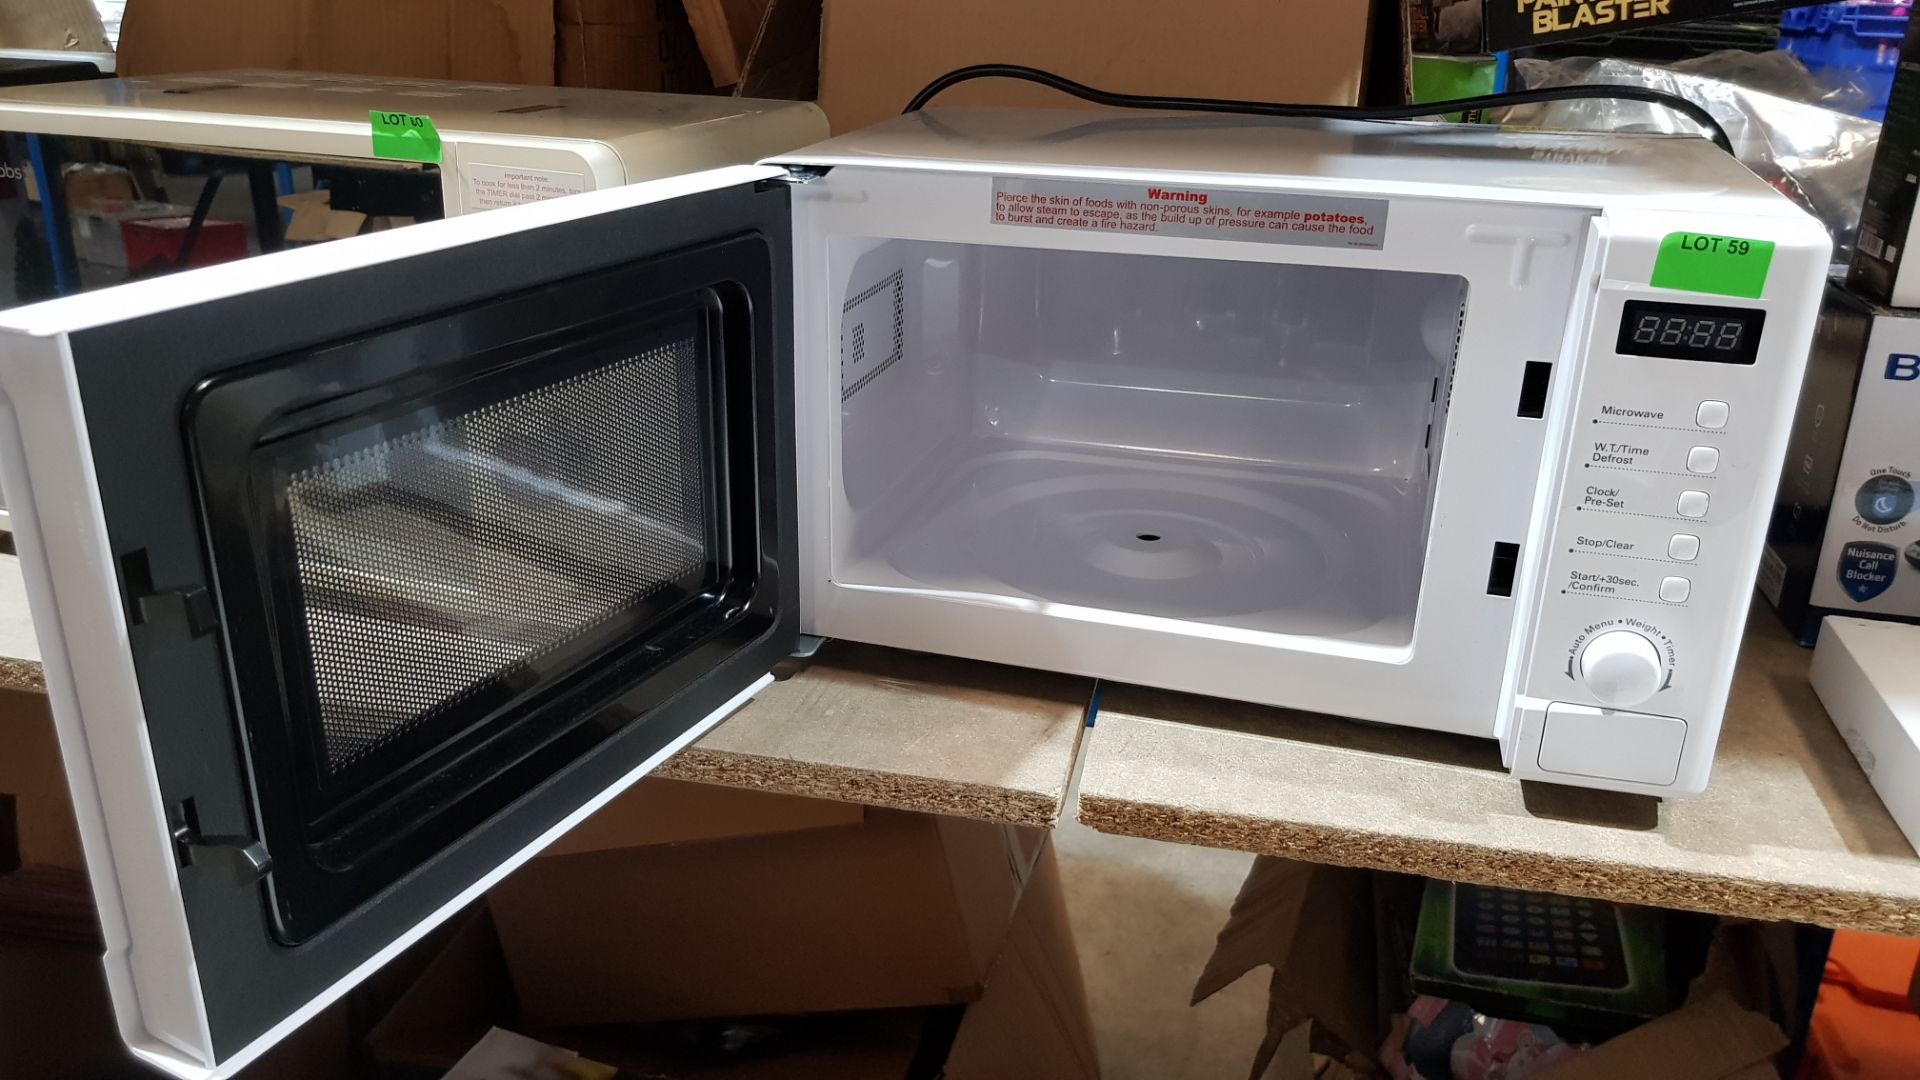 (R6E) Kitchen. 1 X 700W Microwave Oven White (Model GDM301W-16) (Clean, Appears New) - Image 2 of 3